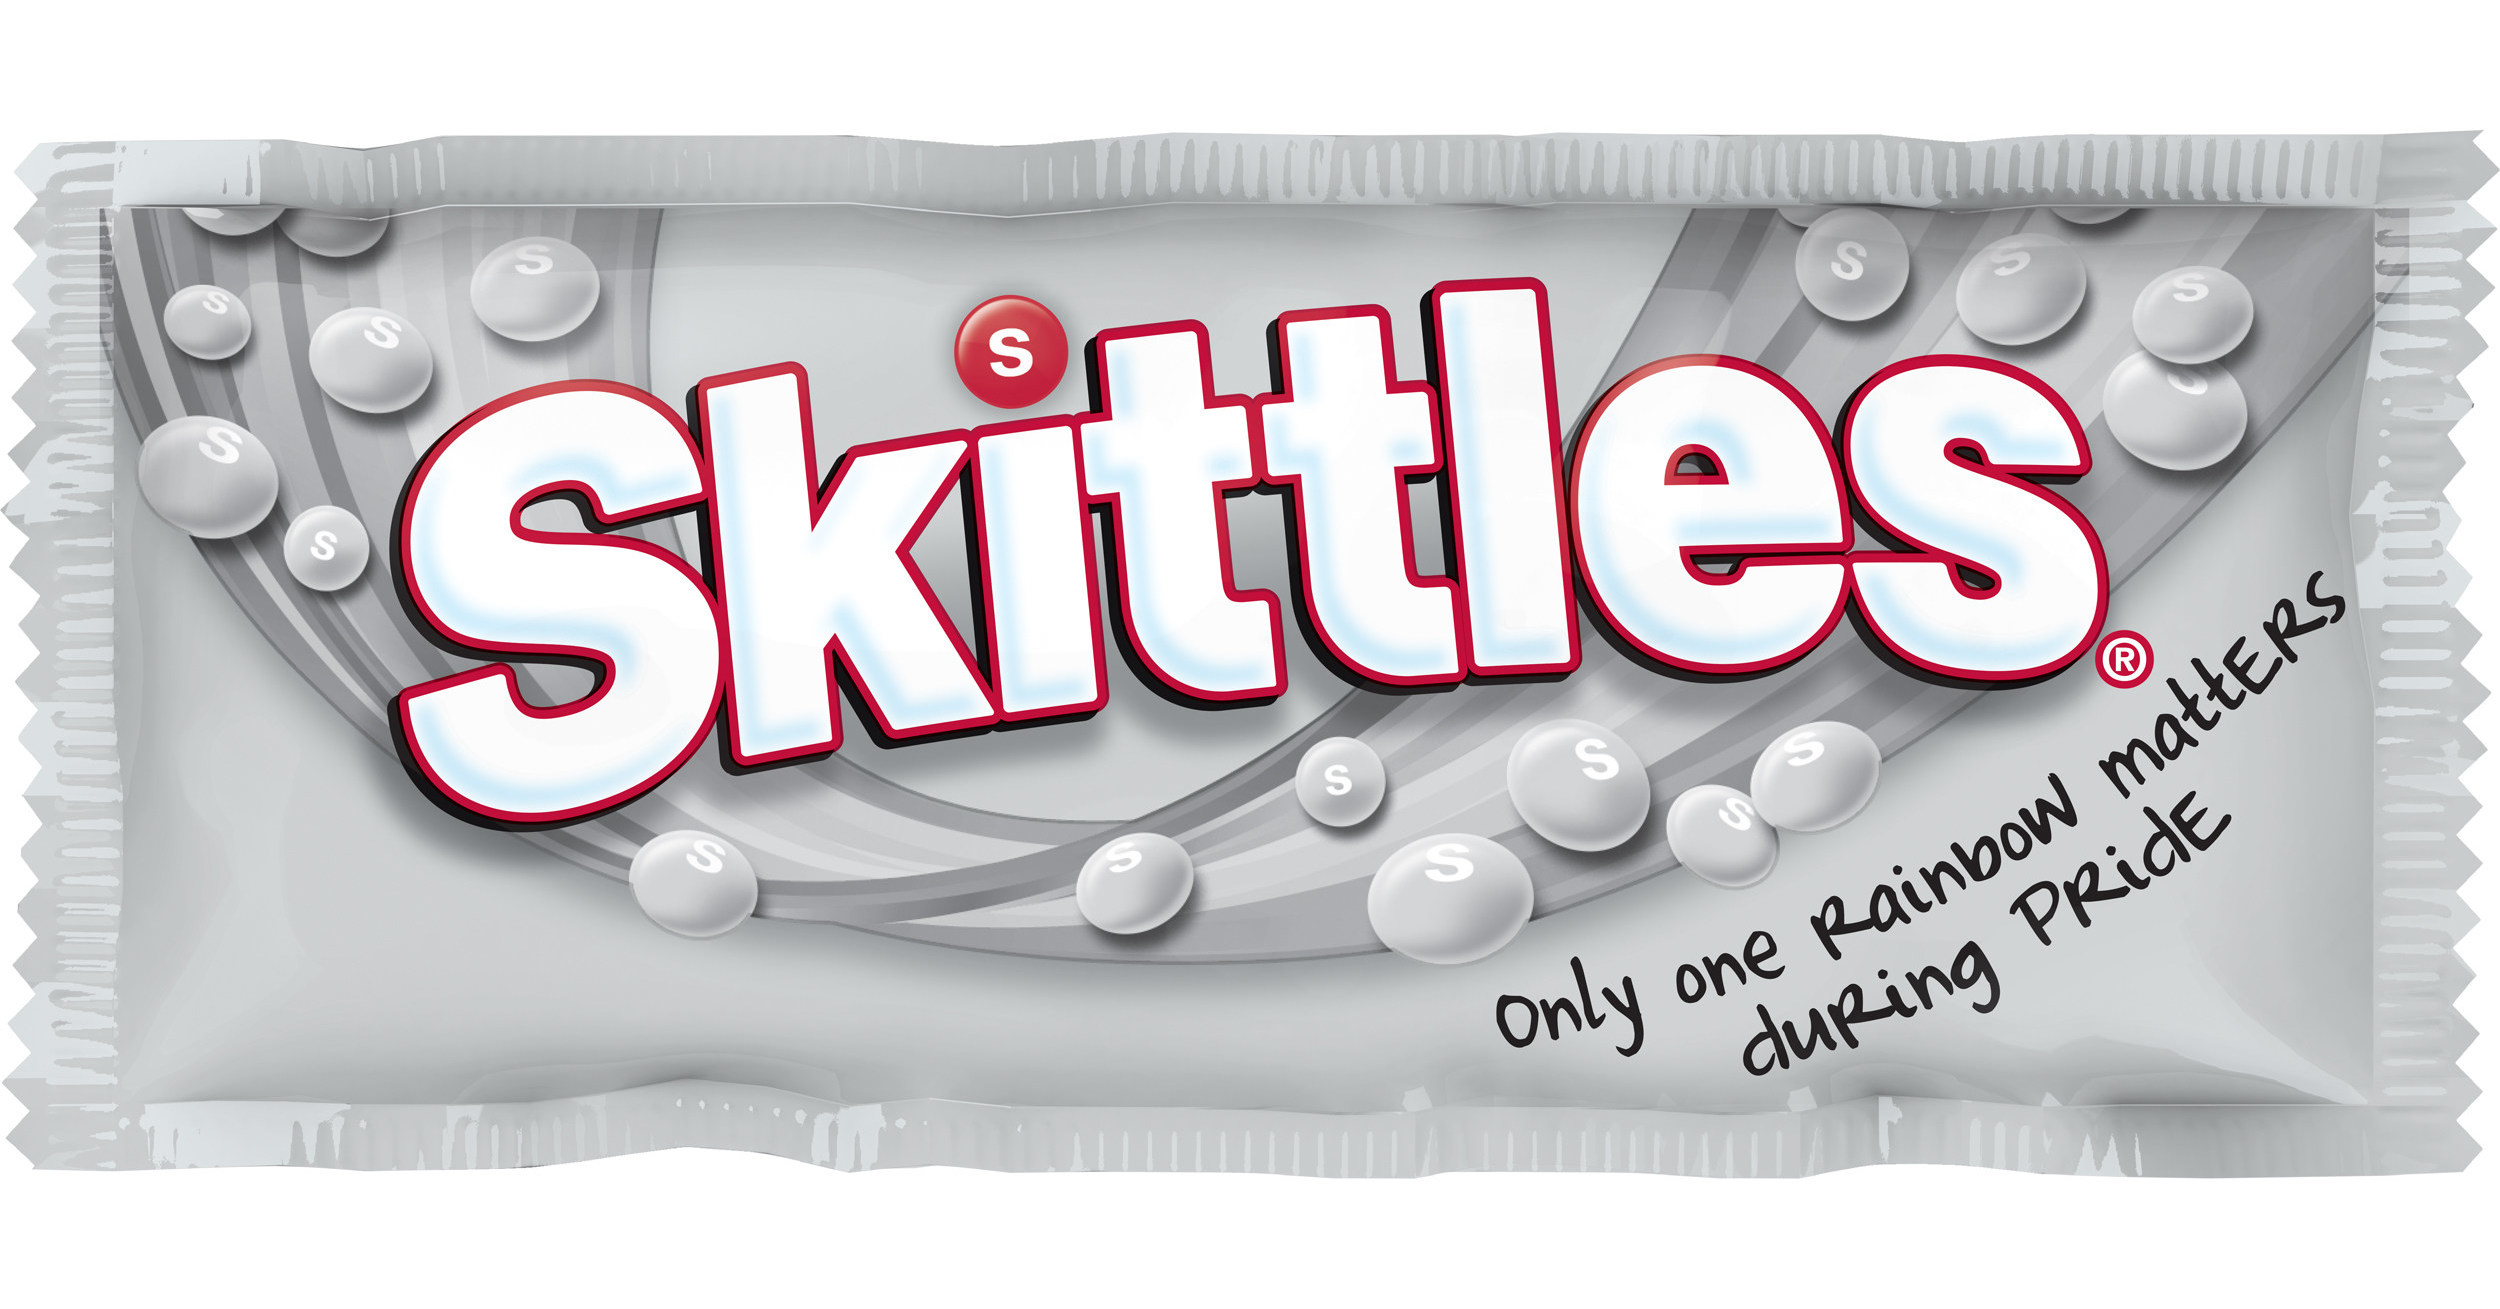 SKITTLES® Gives Up Its Rainbow On Pride Packs To Celebrate The LGBTQ+